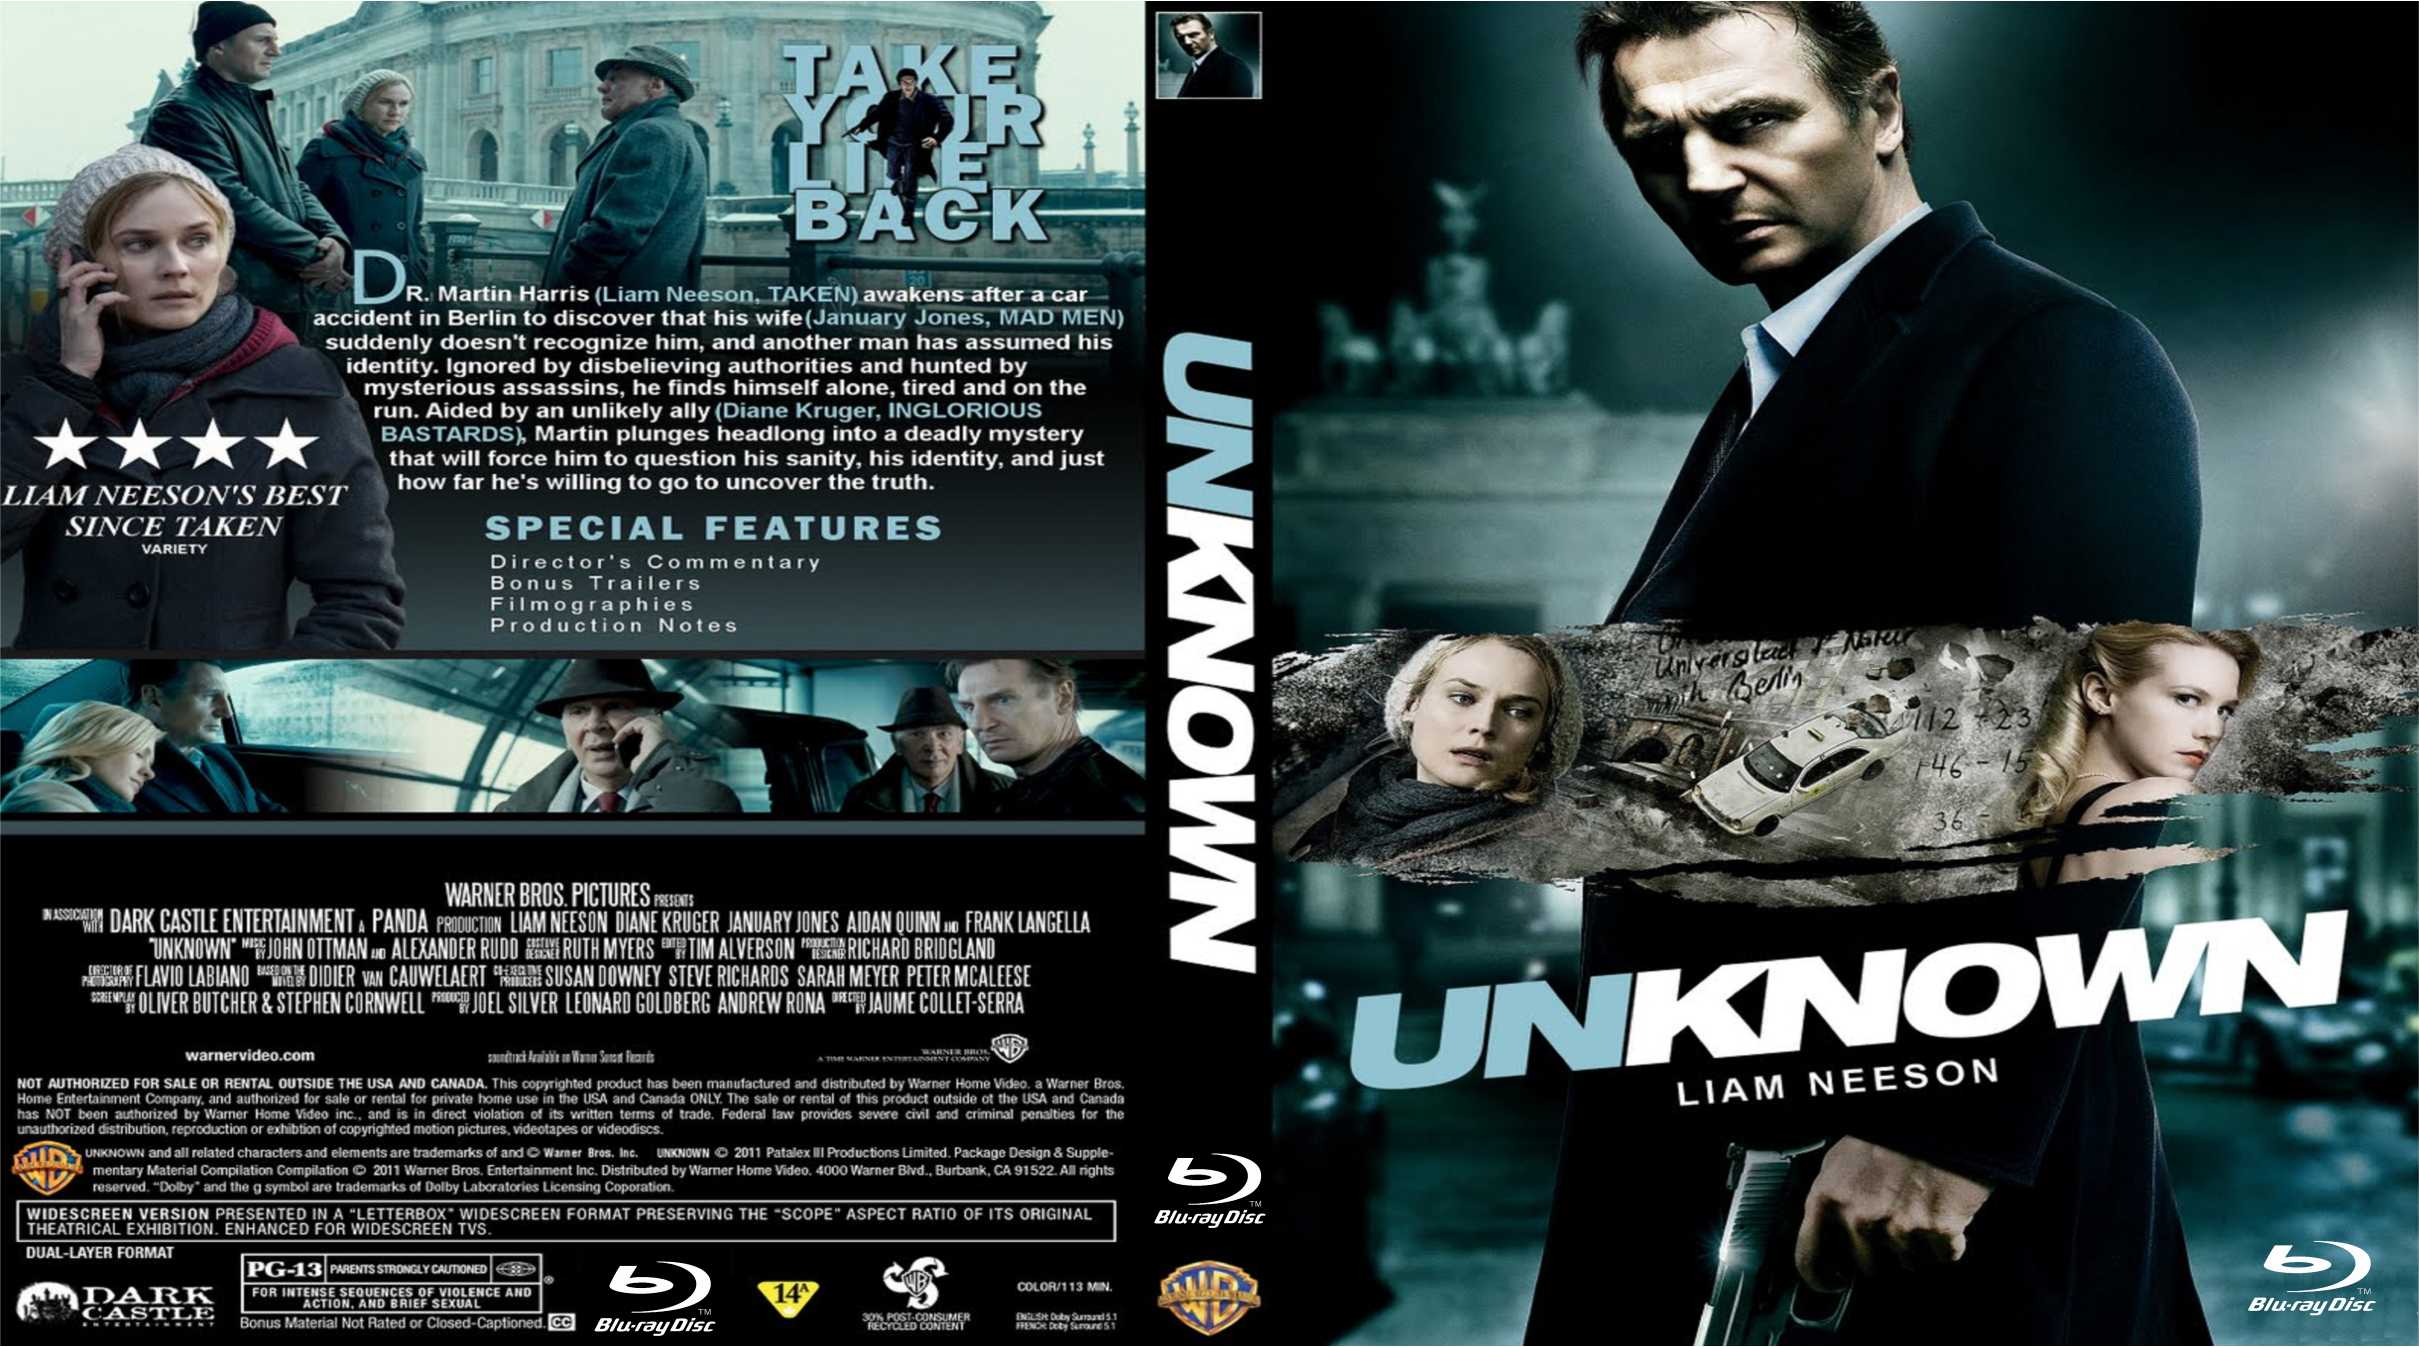 COVERS BOX SK Unknown 2011 Bluray High Quality DVD Blueray Movie